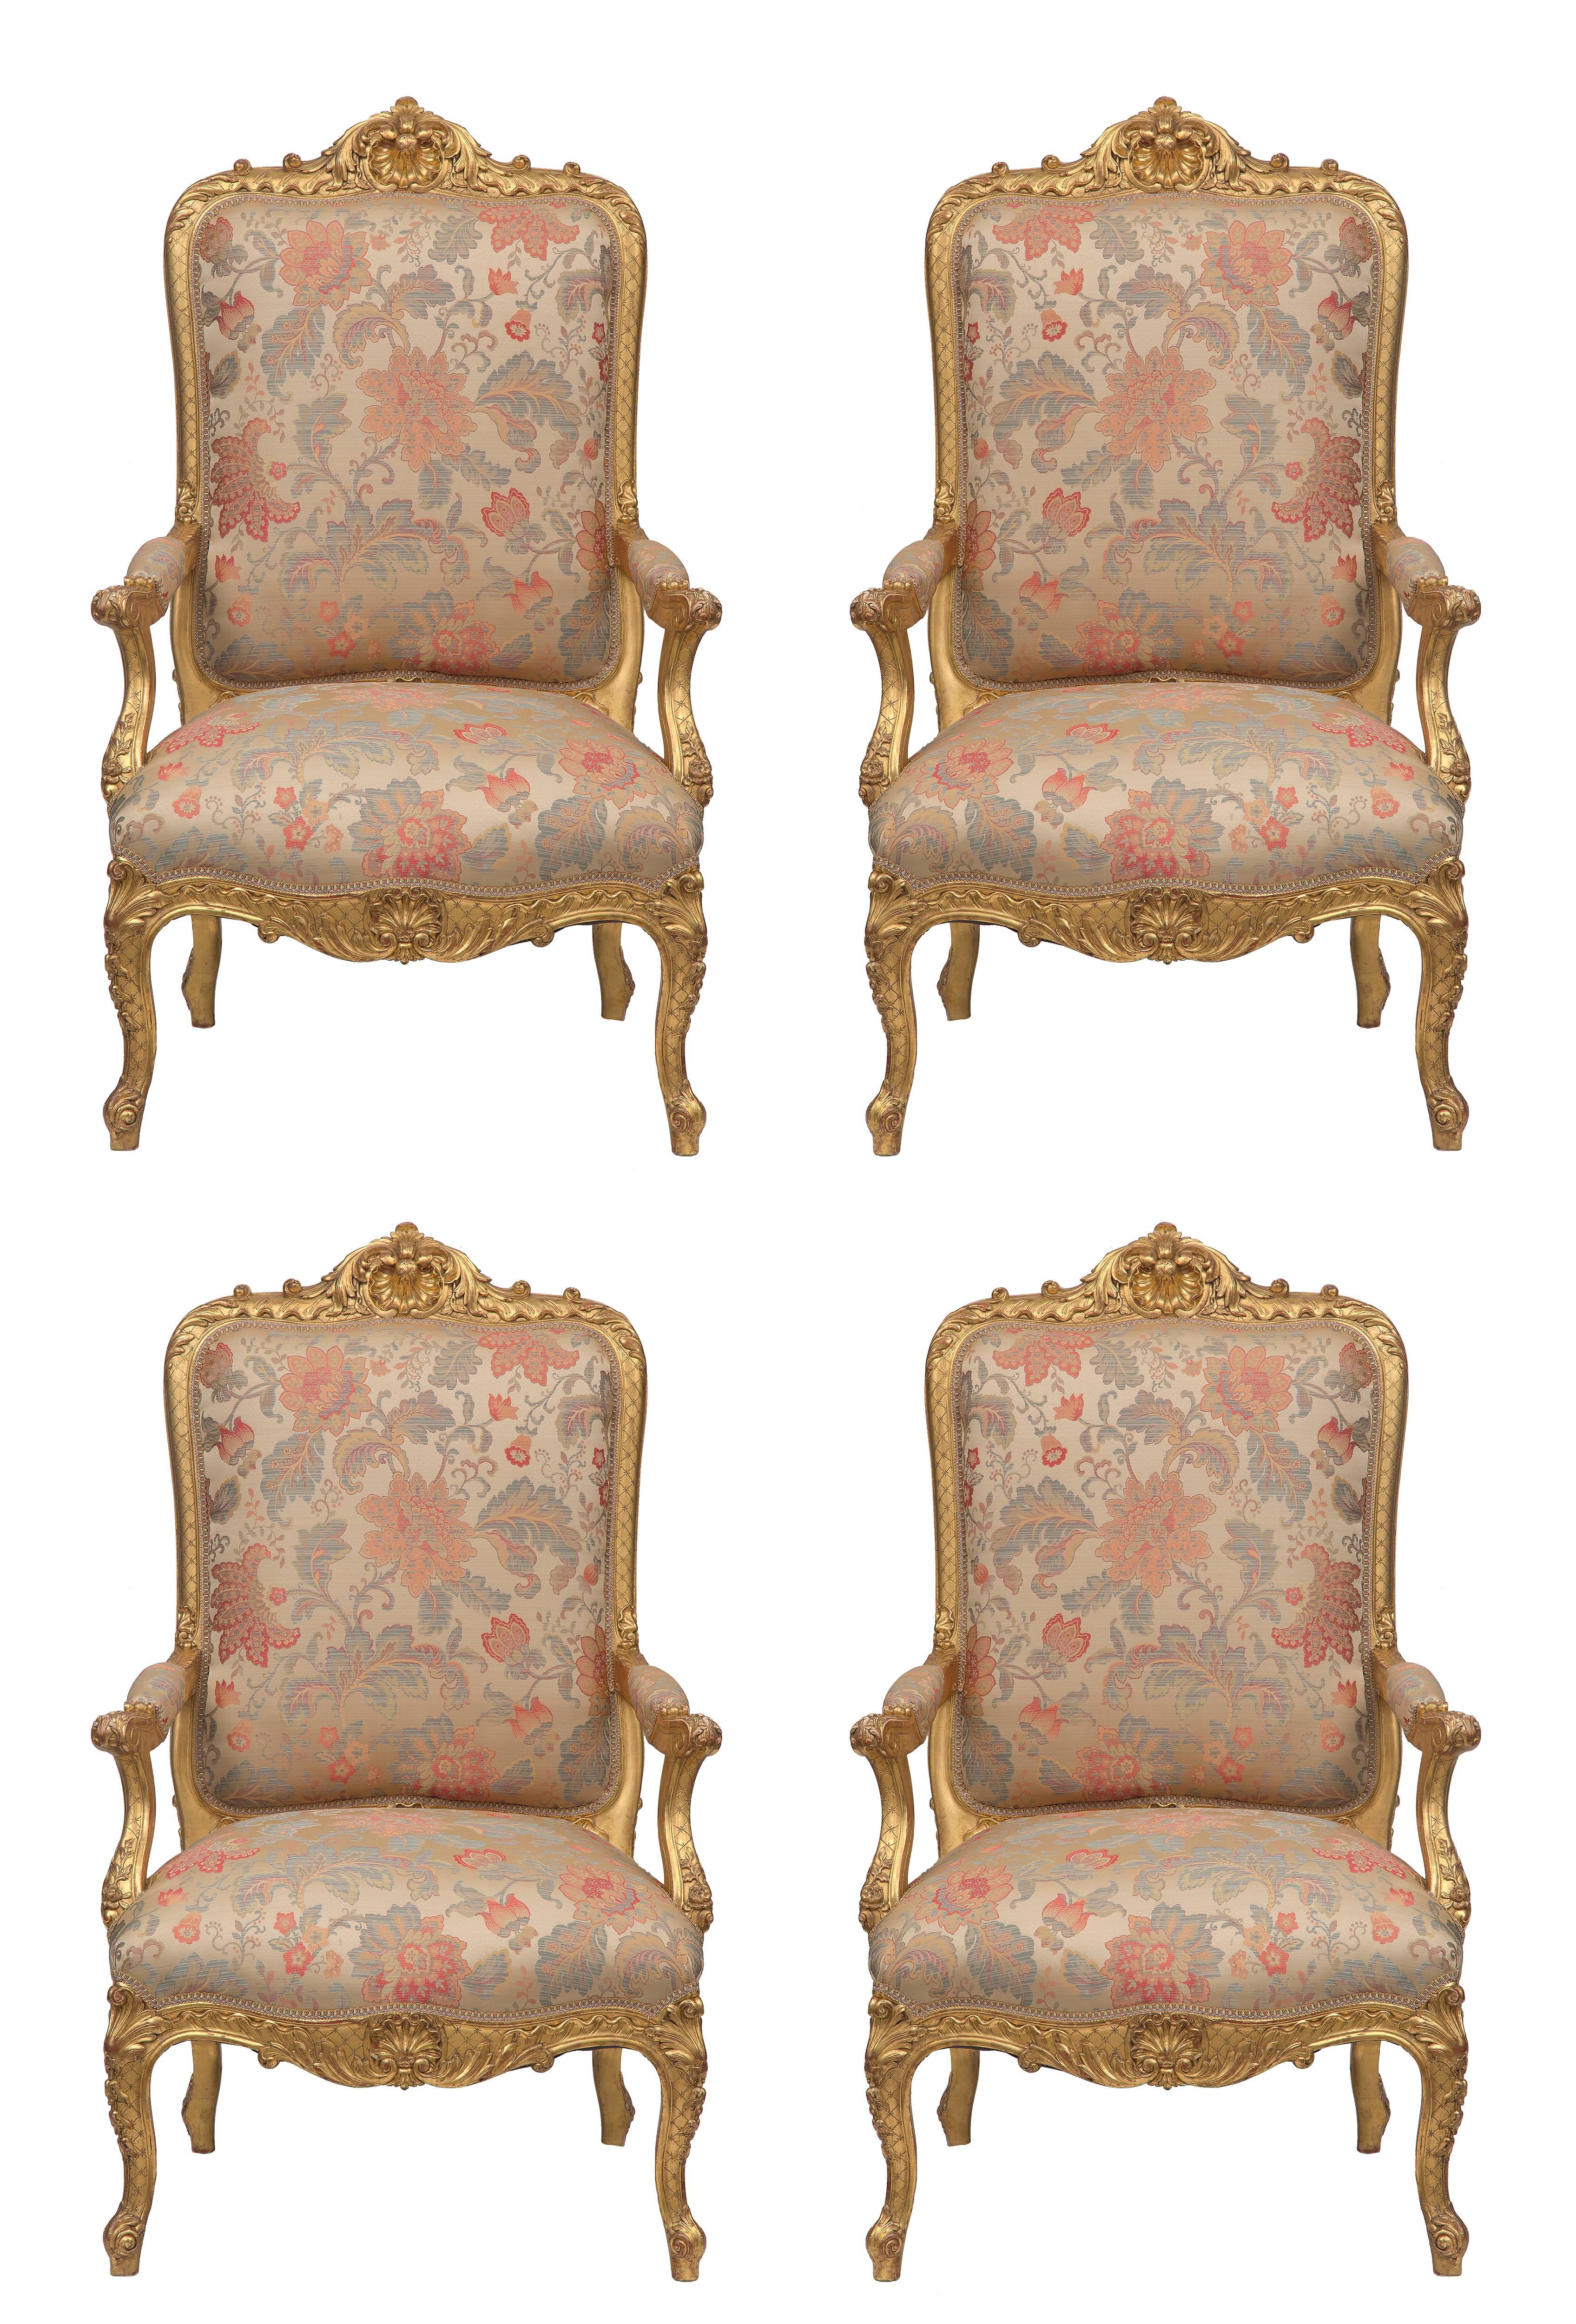 A sensational and large scaled set of four French 19th century Louis XV St. giltwood high back armchairs. The set are raised by handsome and richly carved cabriole legs with an elegant lattice designed background and large acanthus leaves above and